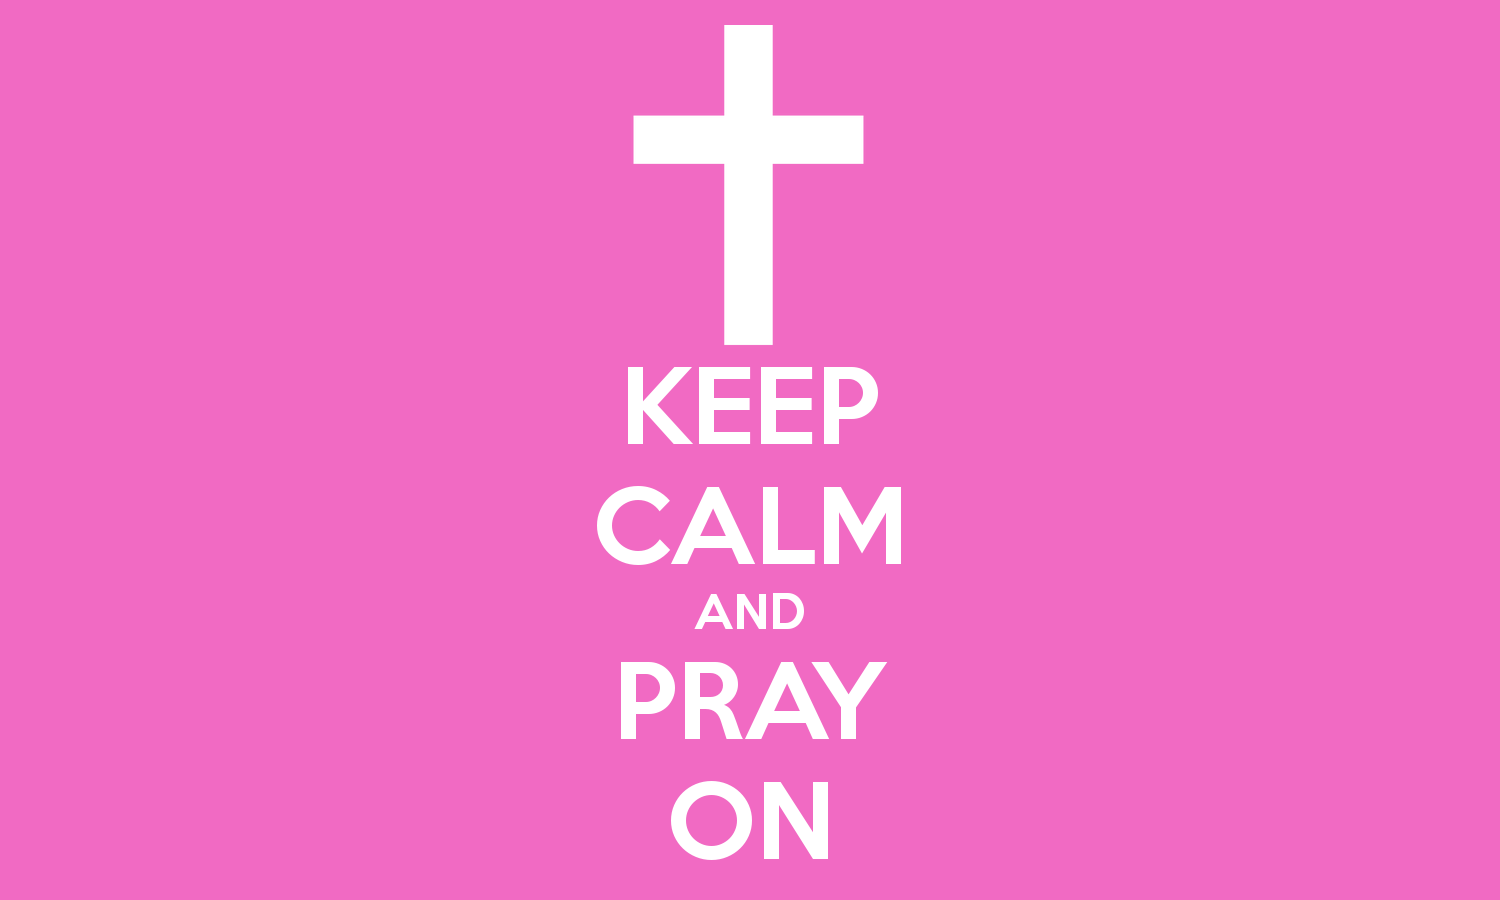 KEEP CALM AND PRAY ON   KEEP CALM AND CARRY ON Image Generator